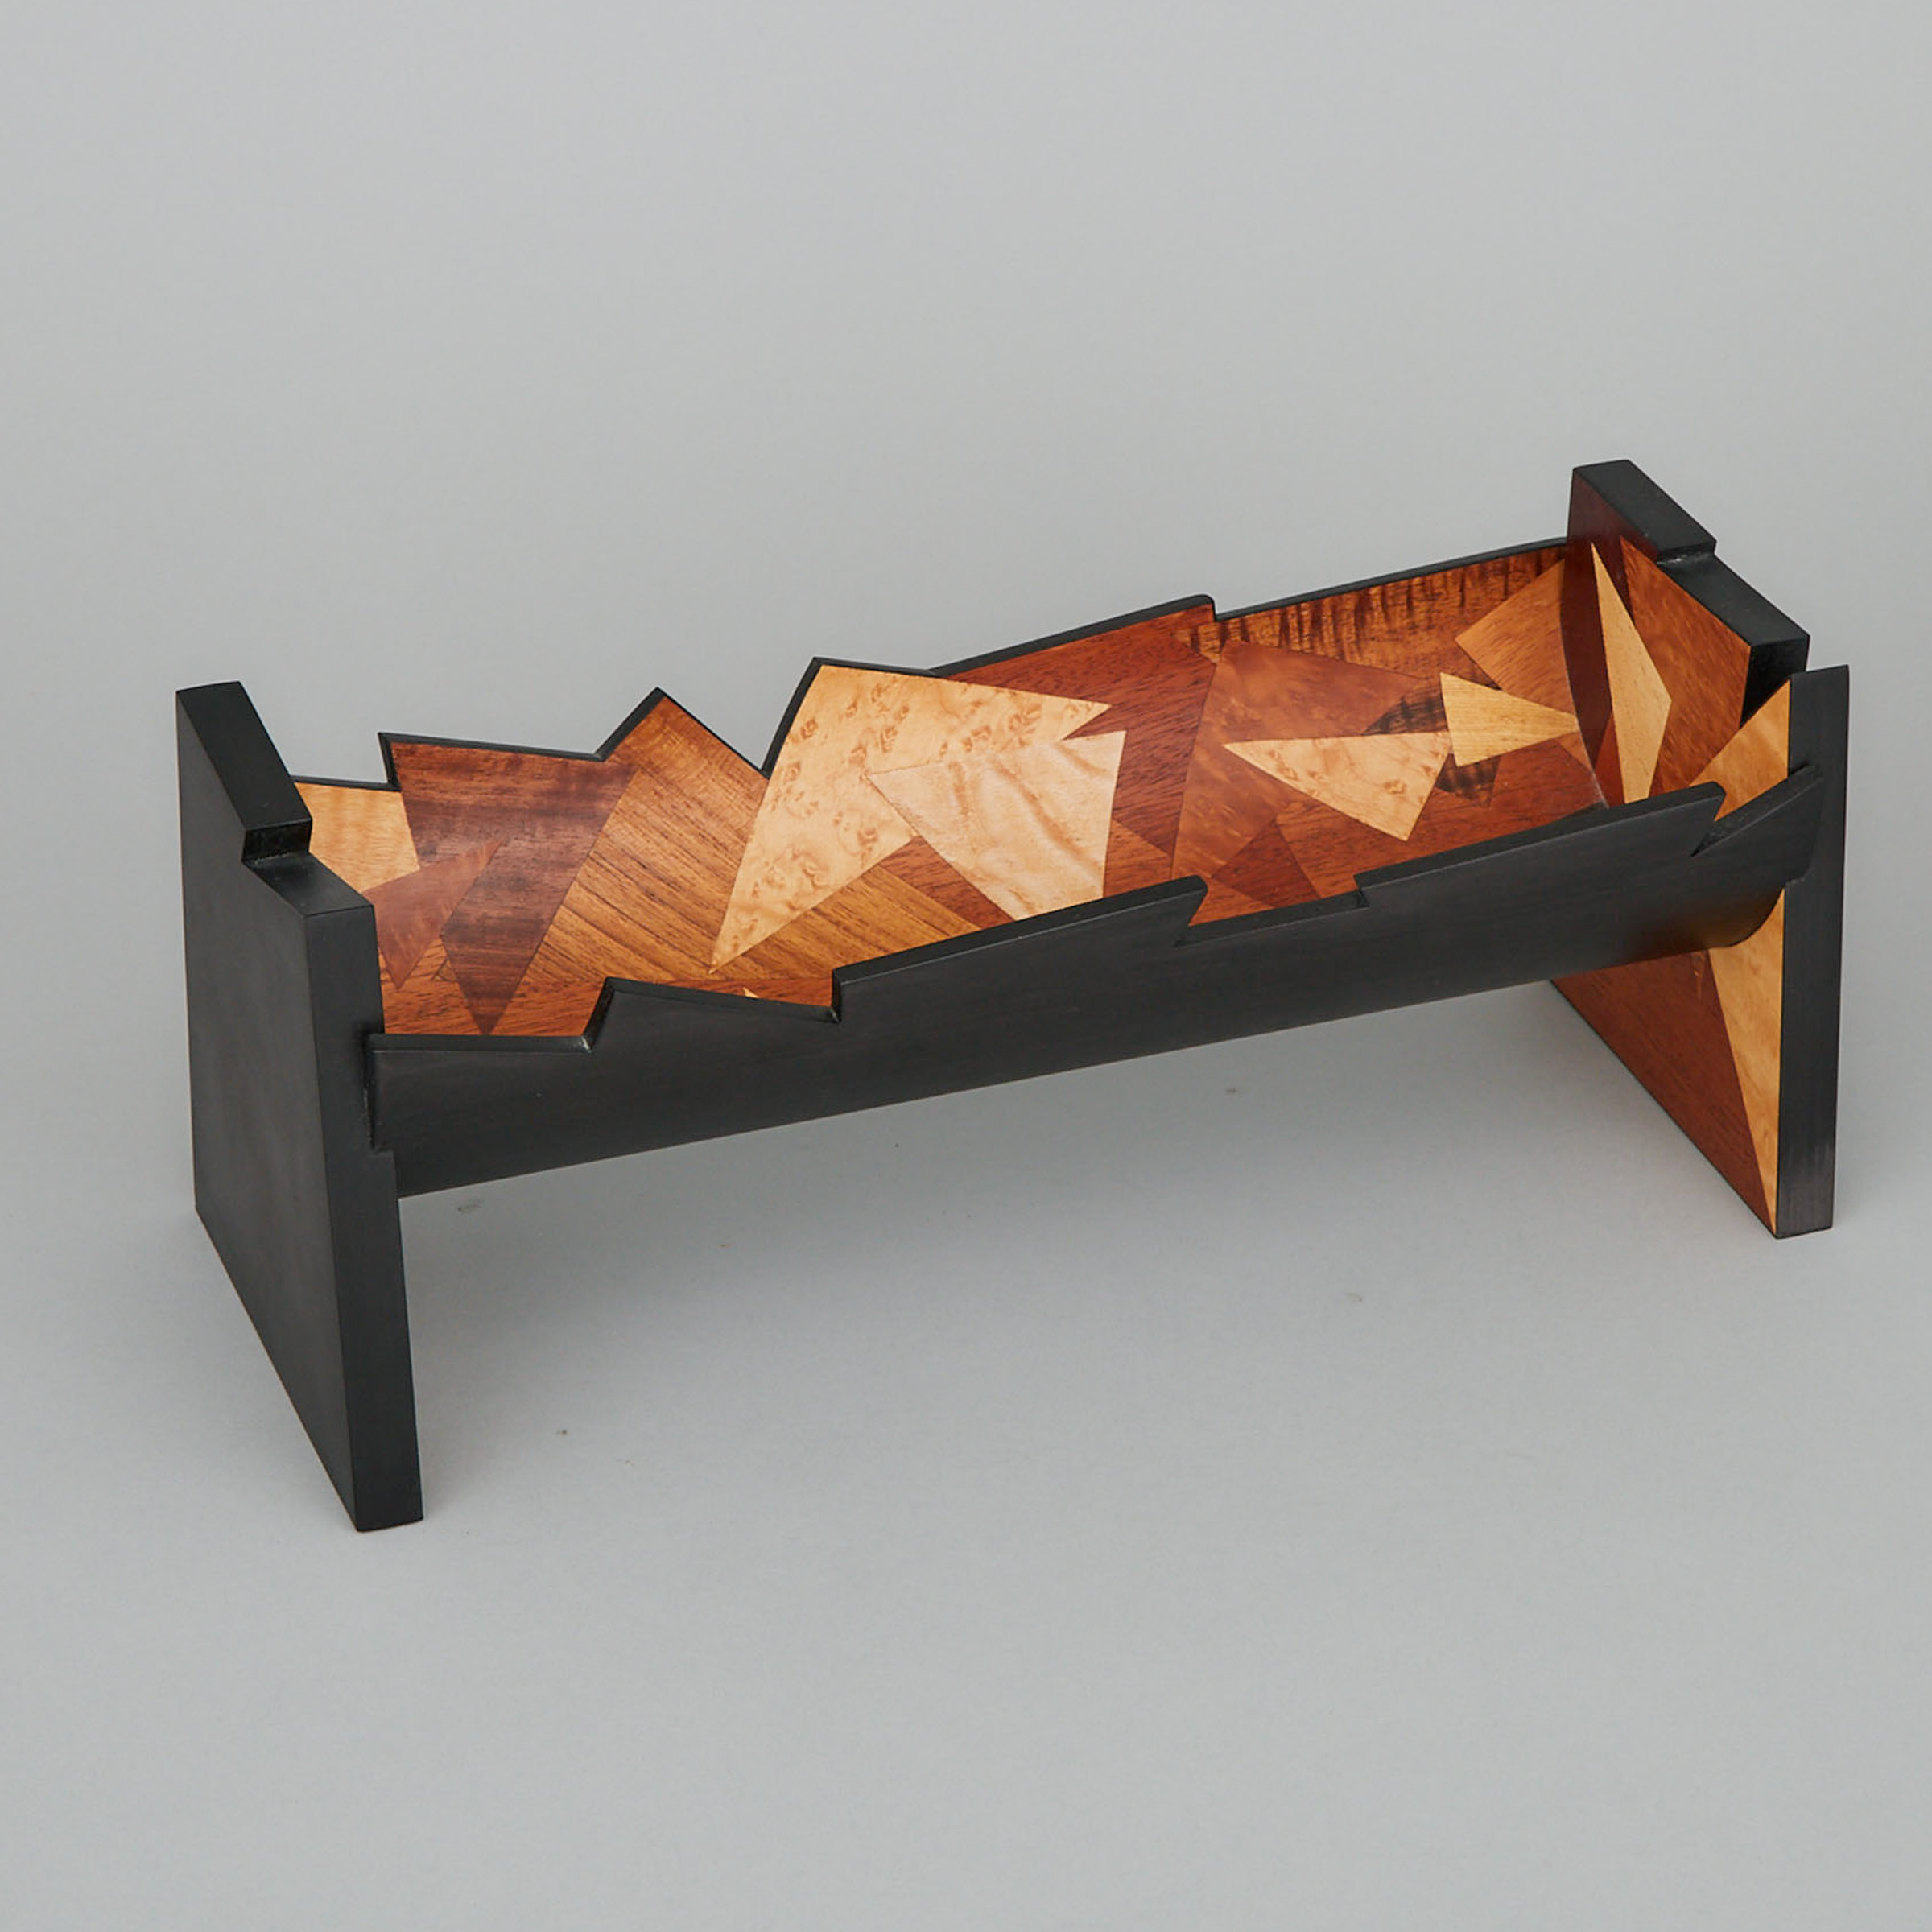 Contemporary Inlaid Mixed Wood Centerpiece Trough Tray by David Atkinson, Guelph, 2002